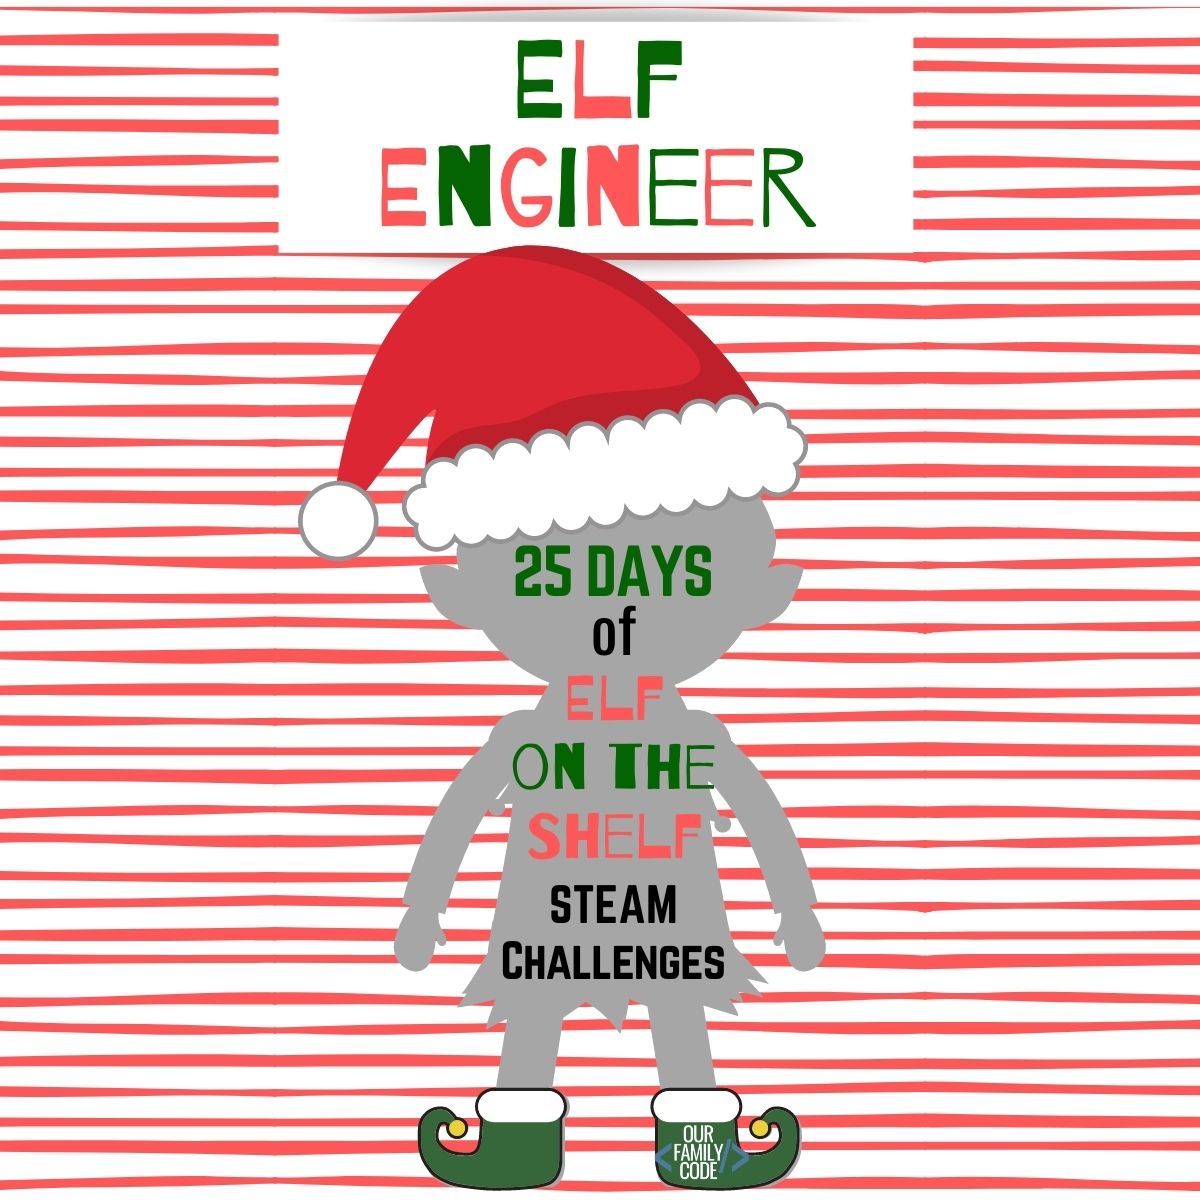 Become an Elf Engineer with these 25 Days of STEAM Challenges for Elf on the Shelf! #STEAM #elfontheshelf #ChristmasSTEAM #STEM #STEMchallenges